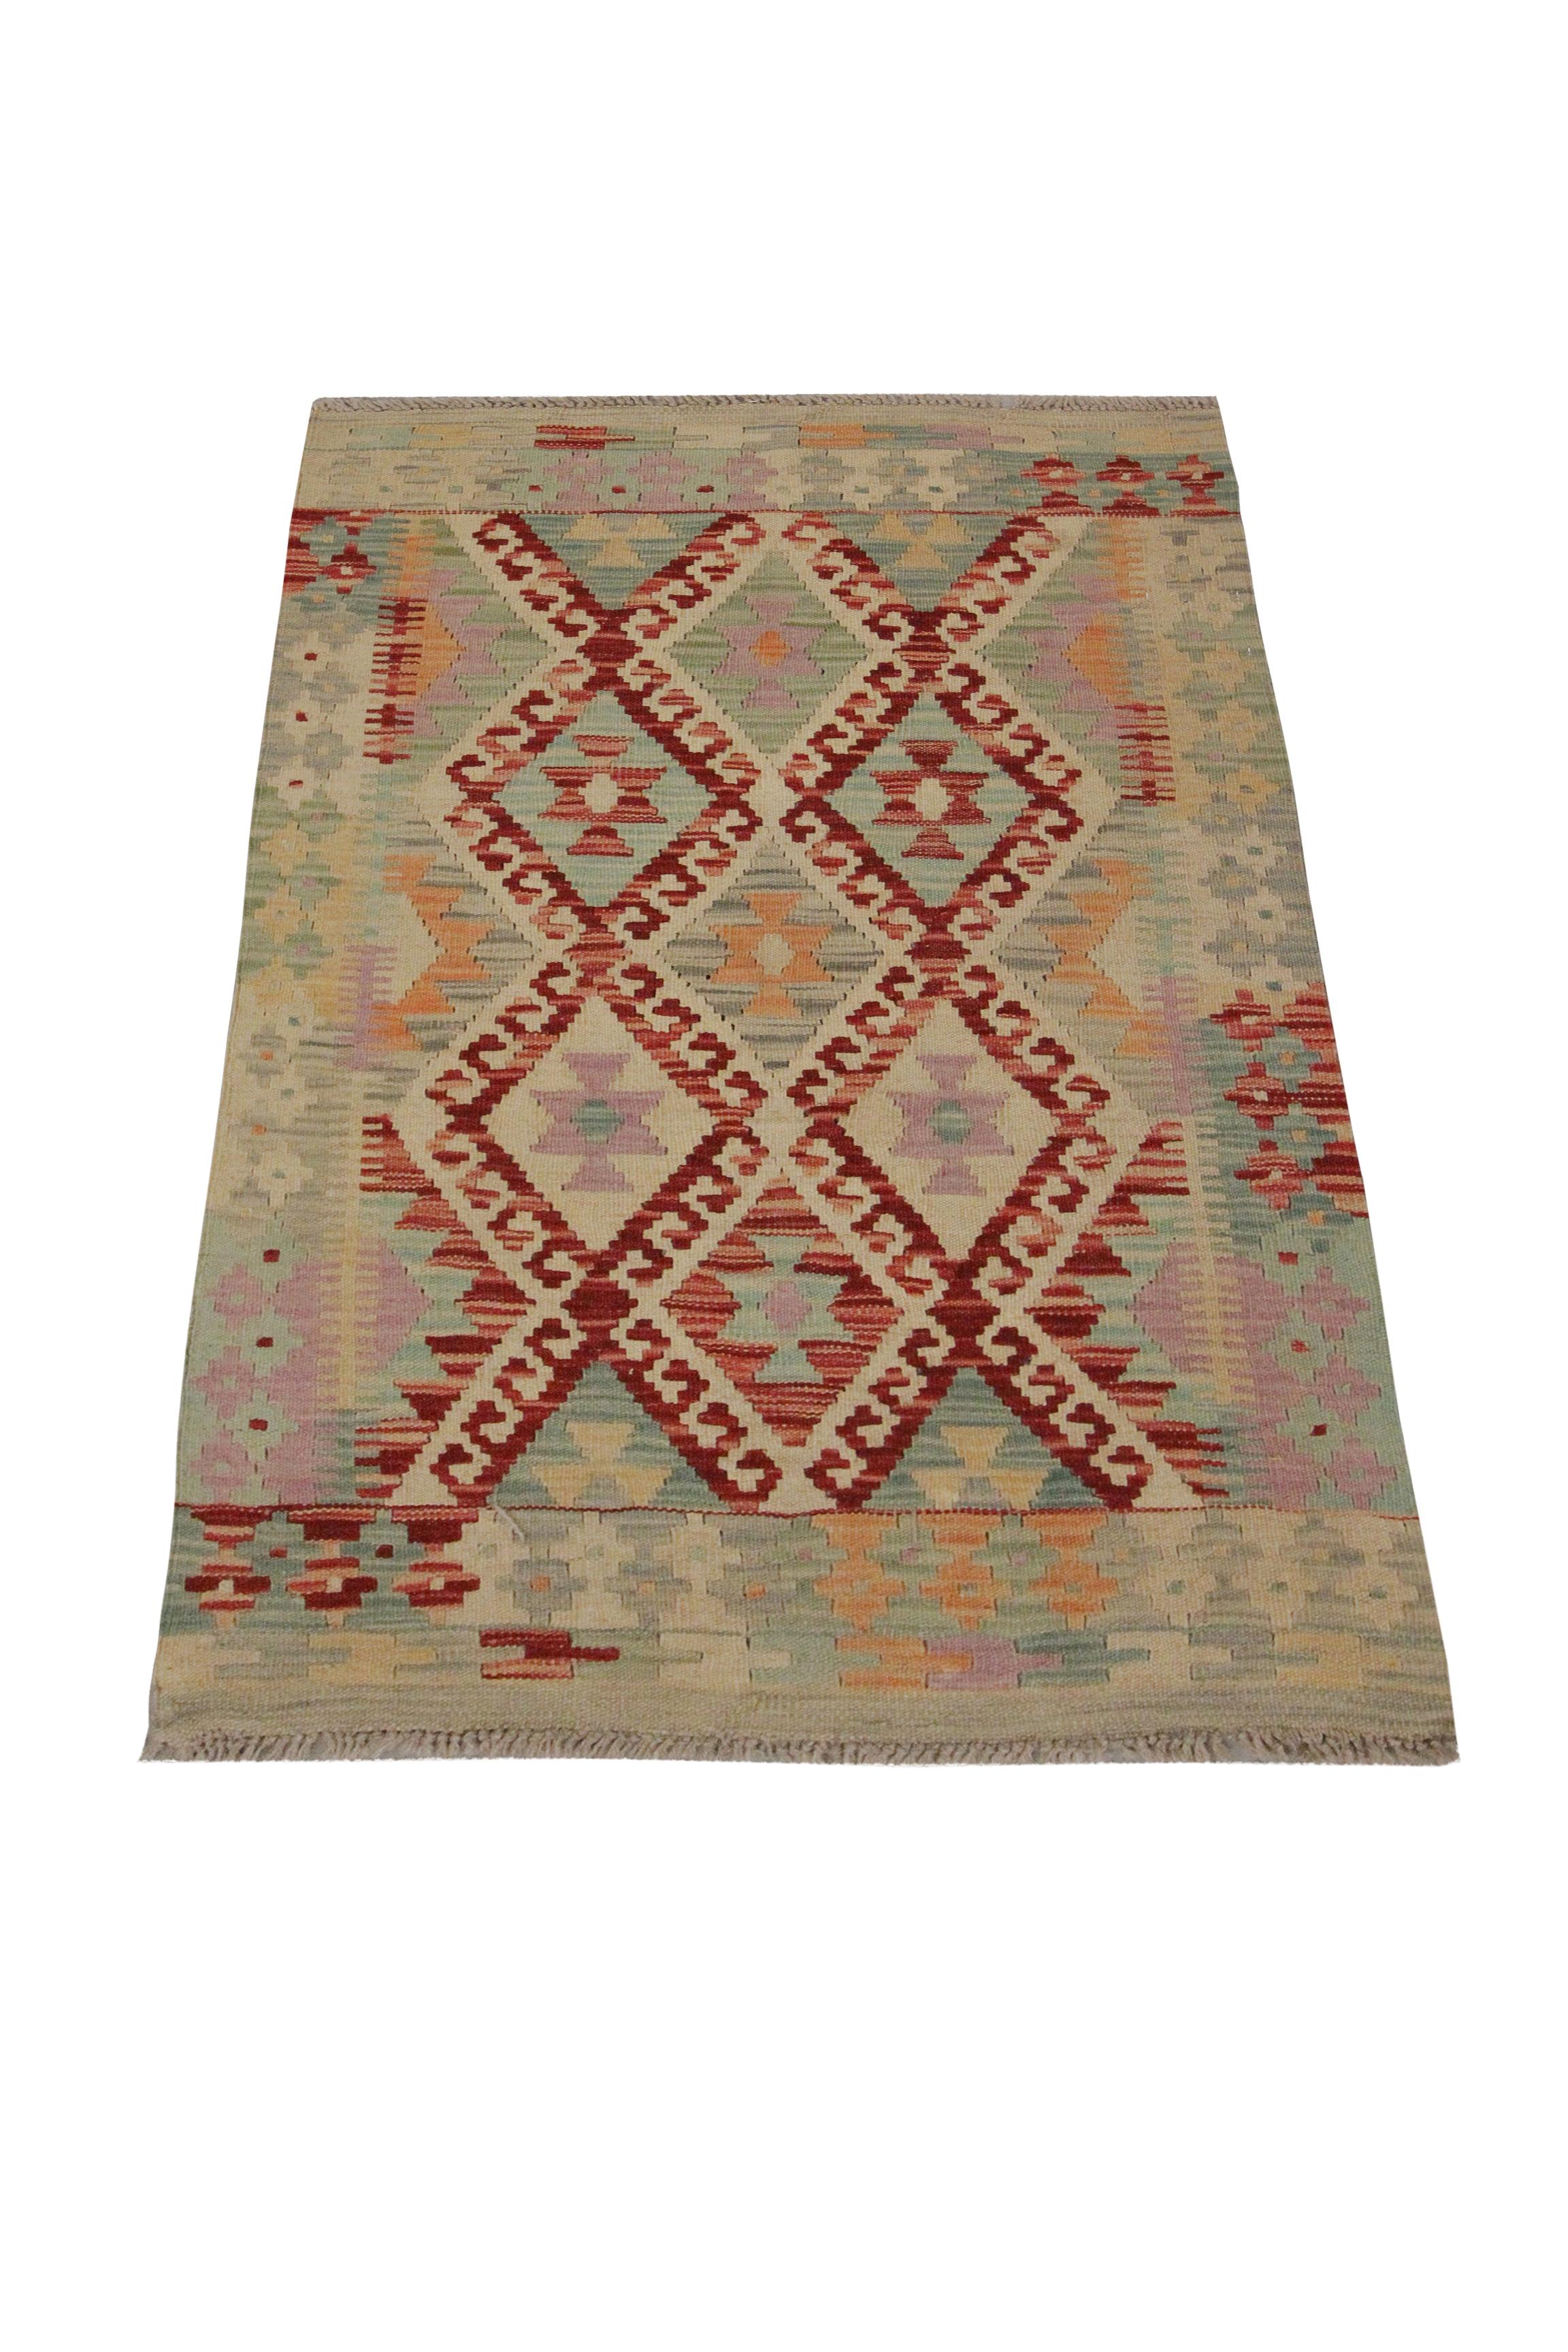 A sleek symmetrical design covers this beautiful wool Kilim woven with subtle accent colours of cream, red and green. The traditional tribal design displayed on this piece makes it the perfect accent piece for any small space. The colour and design